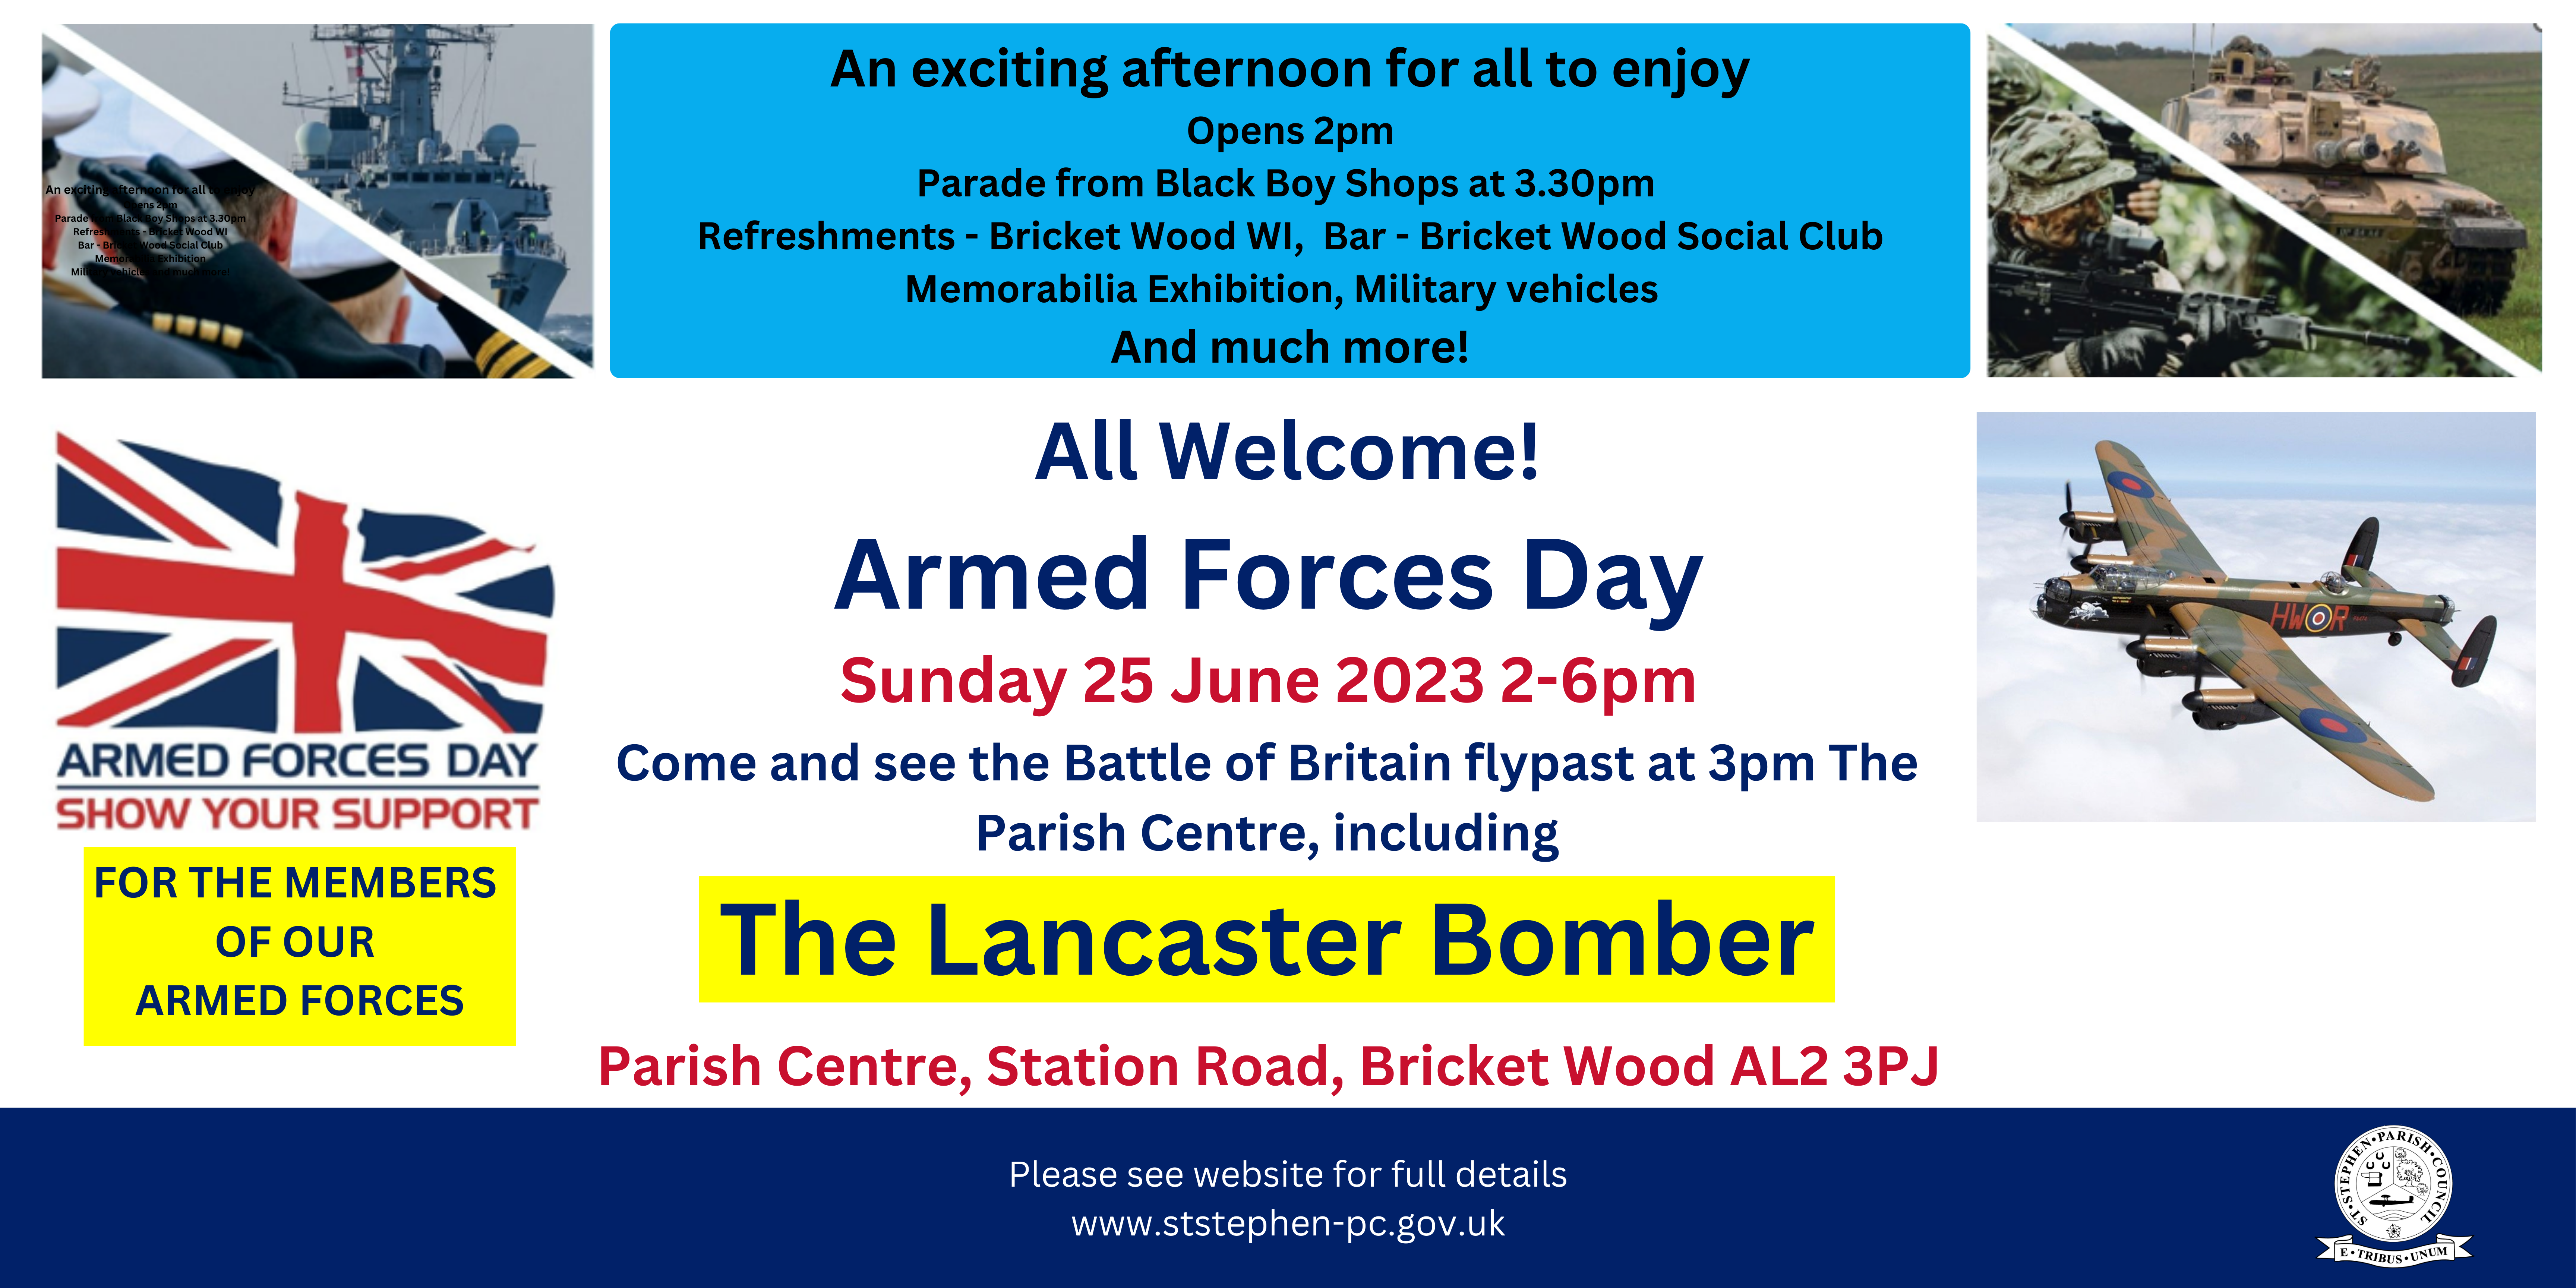 Come and see the Battle of Britain flypast at 3pm The Parish Centre, including The Lancaster Bomber